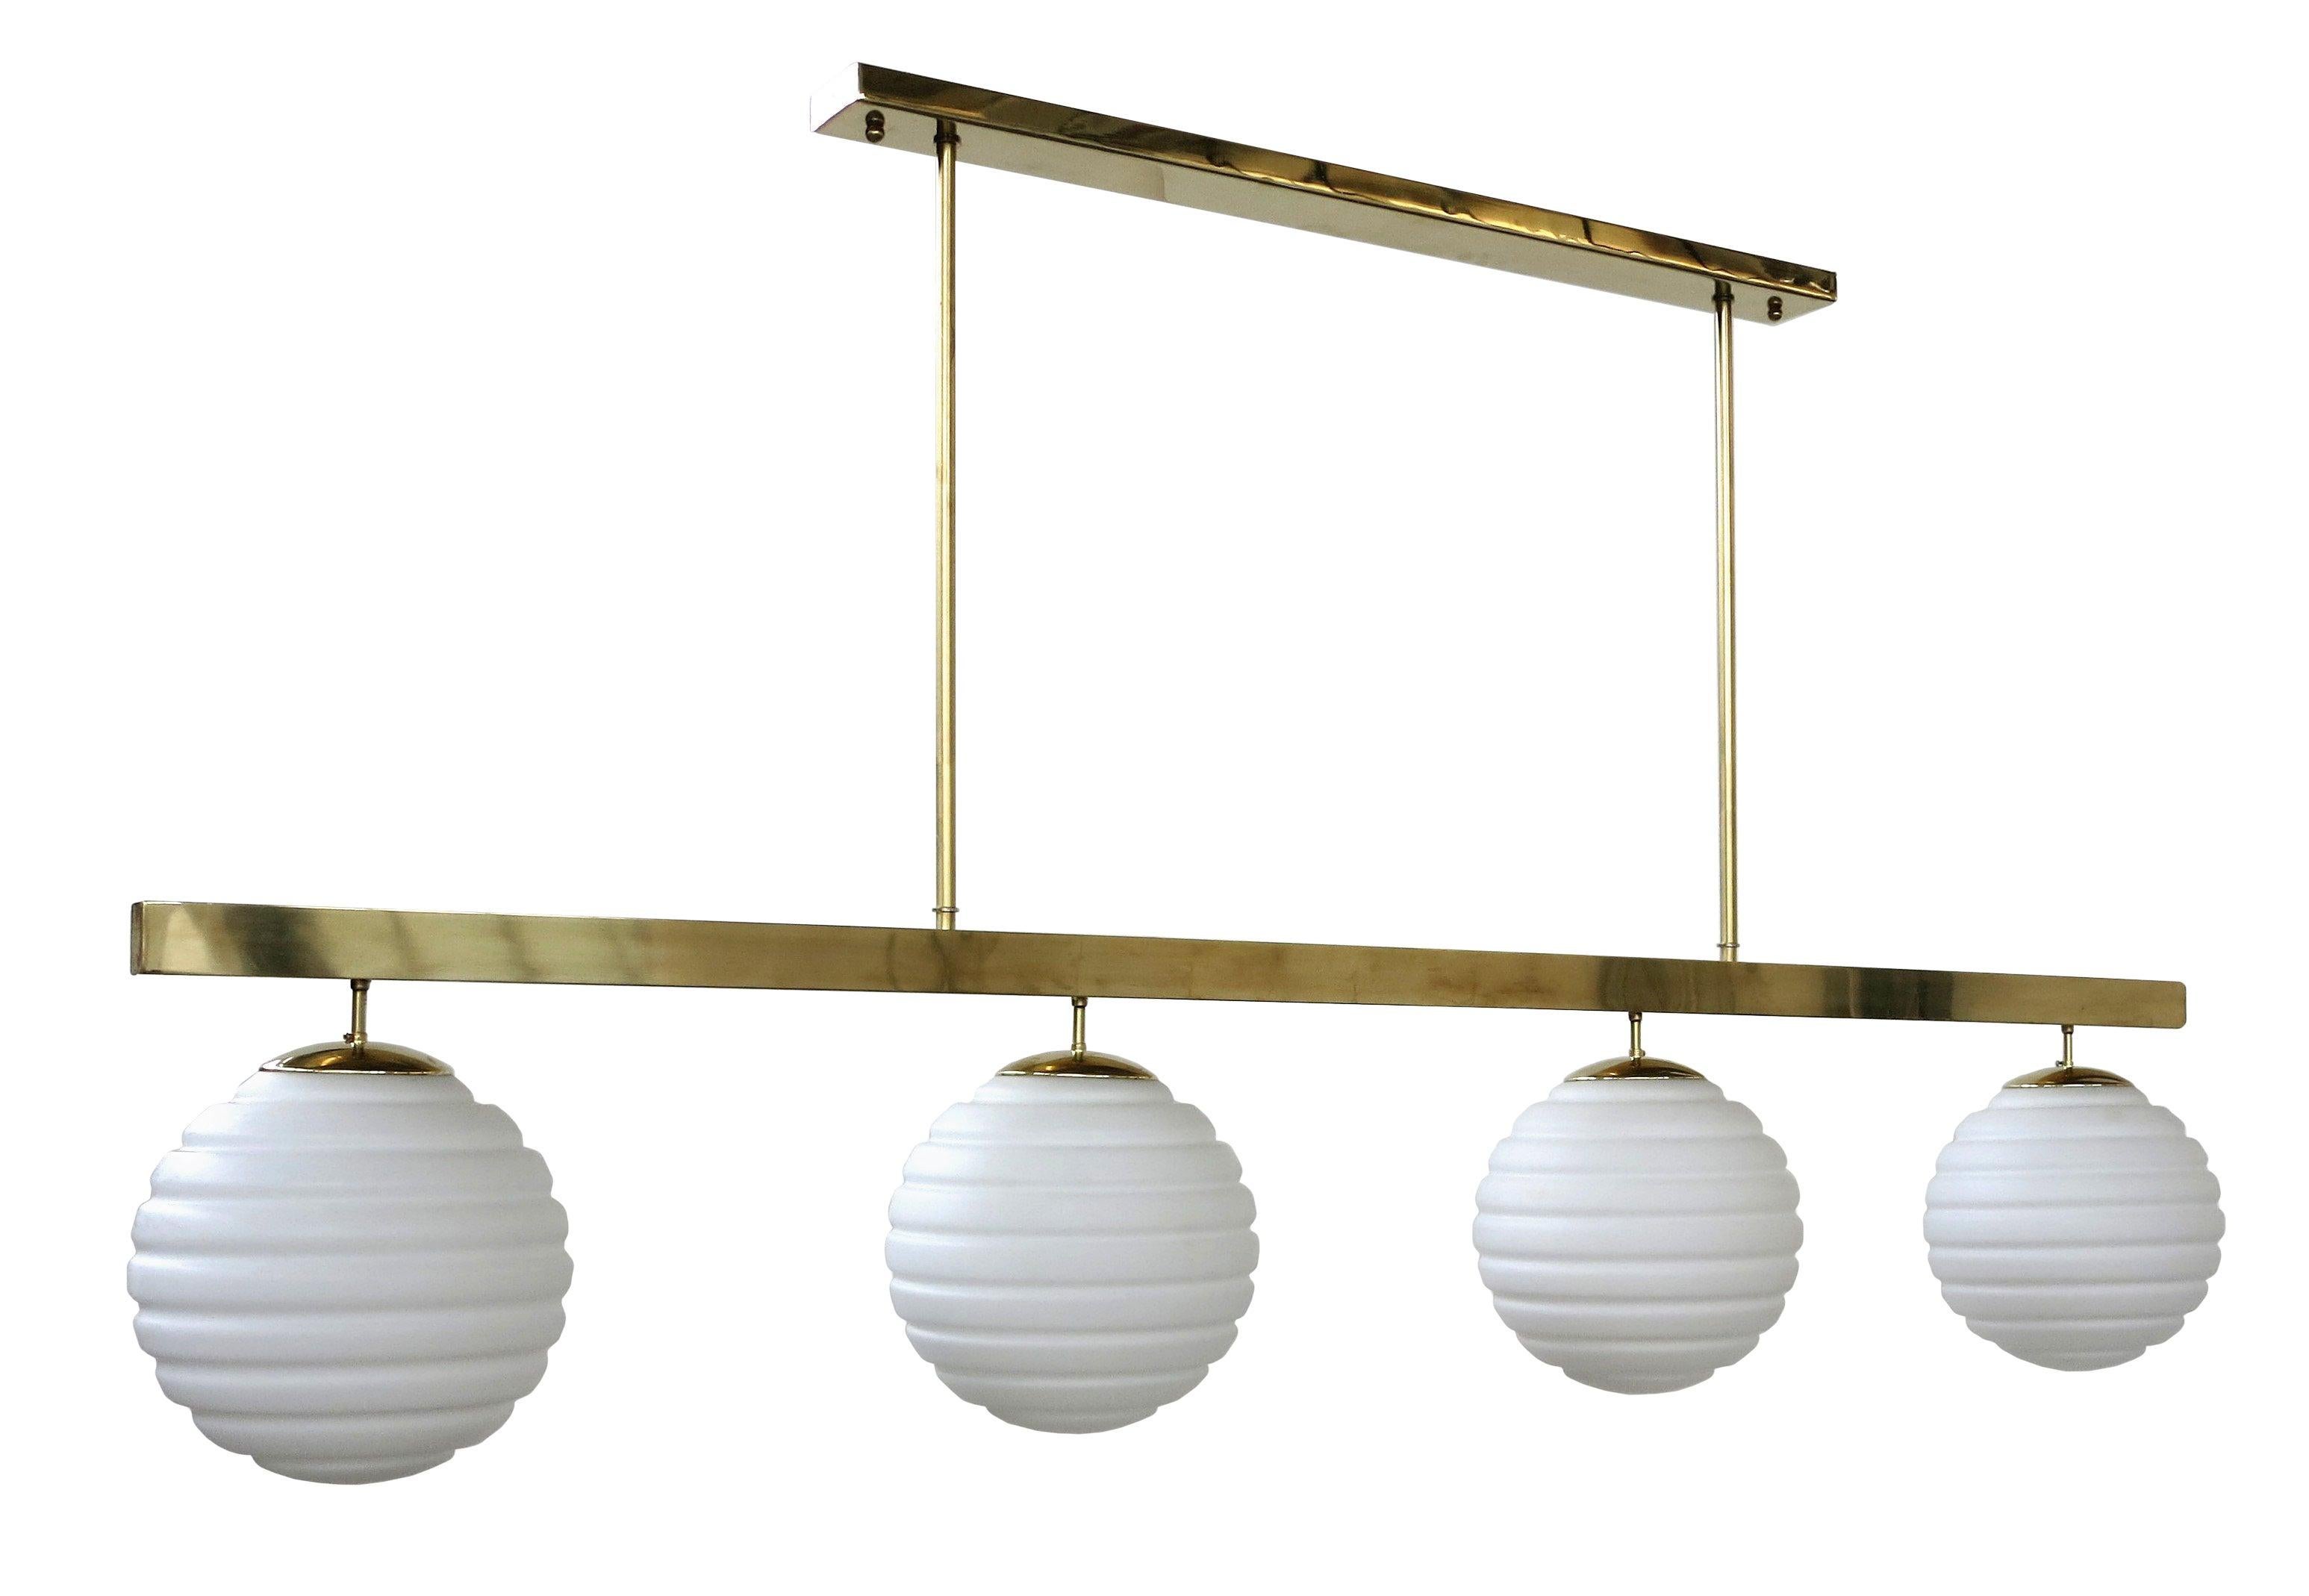 Italian pendant chandelier shown in white ribbed Murano glass globes, mounted on polished brass frame / Designed by Fabio Bergomi for Fabio Ltd / Made in Italy
4 lights / E26 or E27 type / max 40W each
Measures: Height 41.5 inches including rods and